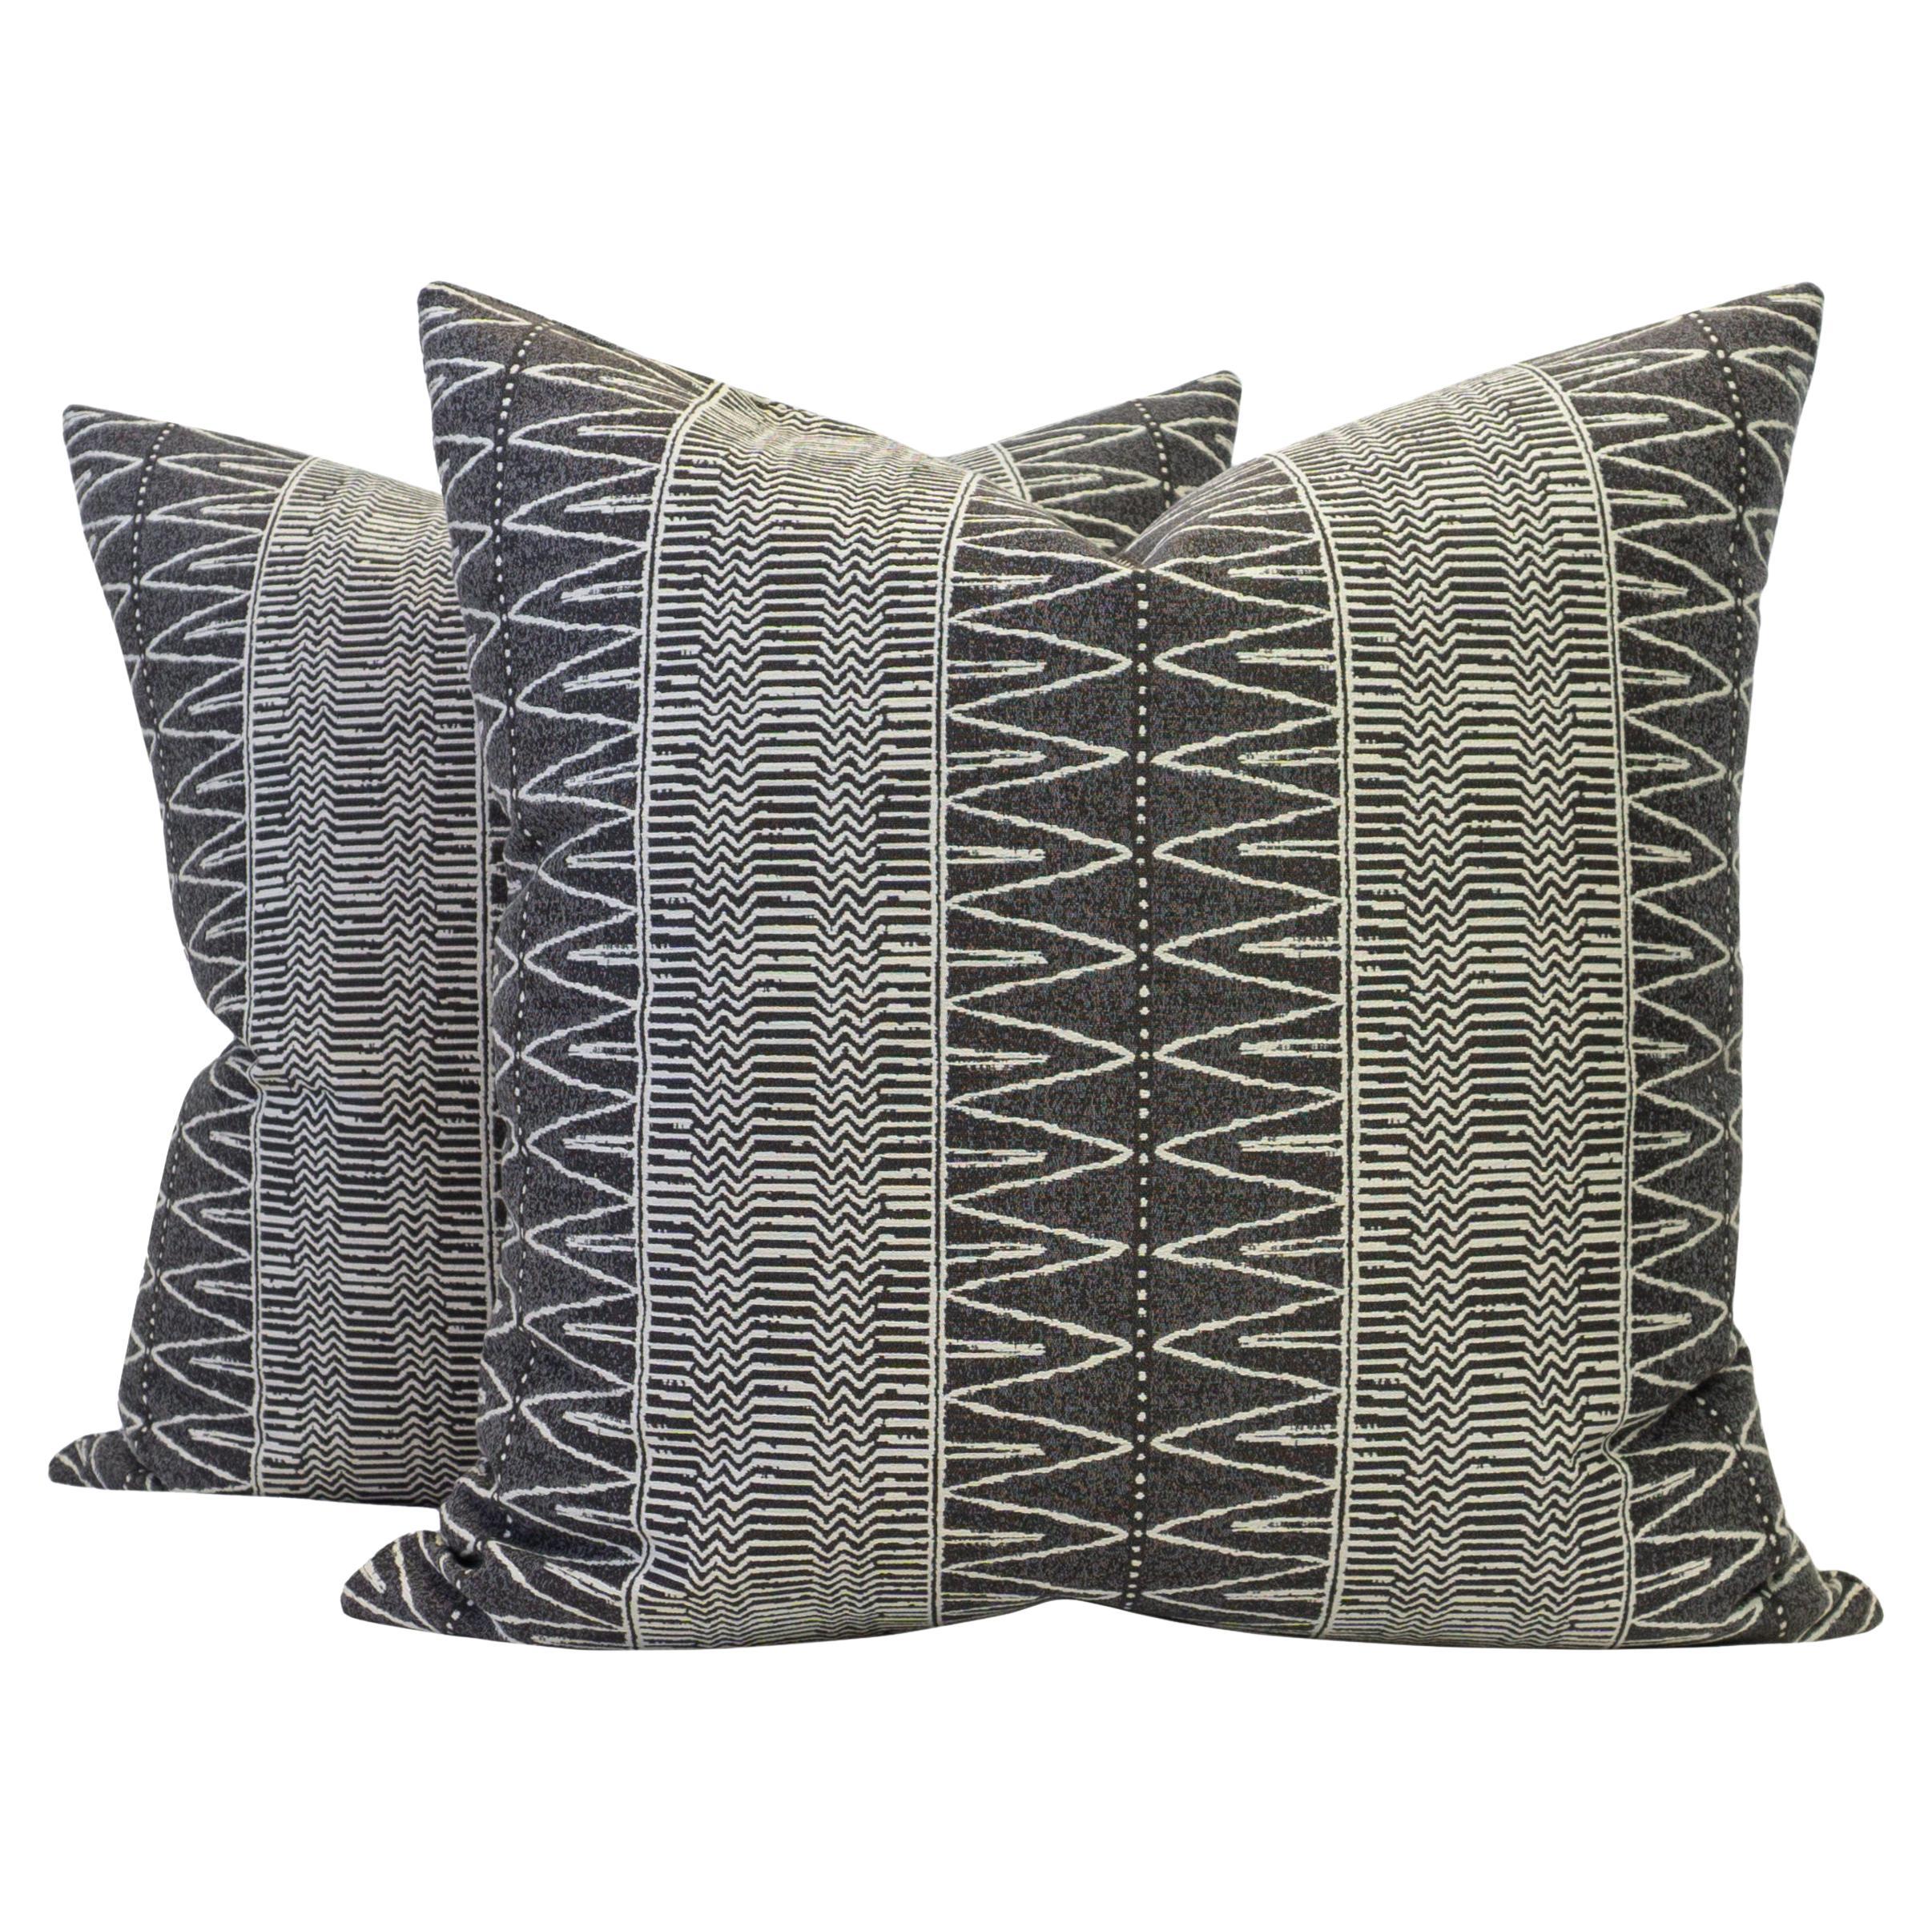 Zig Zag Patterned Stain Resistant Fabric Gray and White Square Pillows For Sale